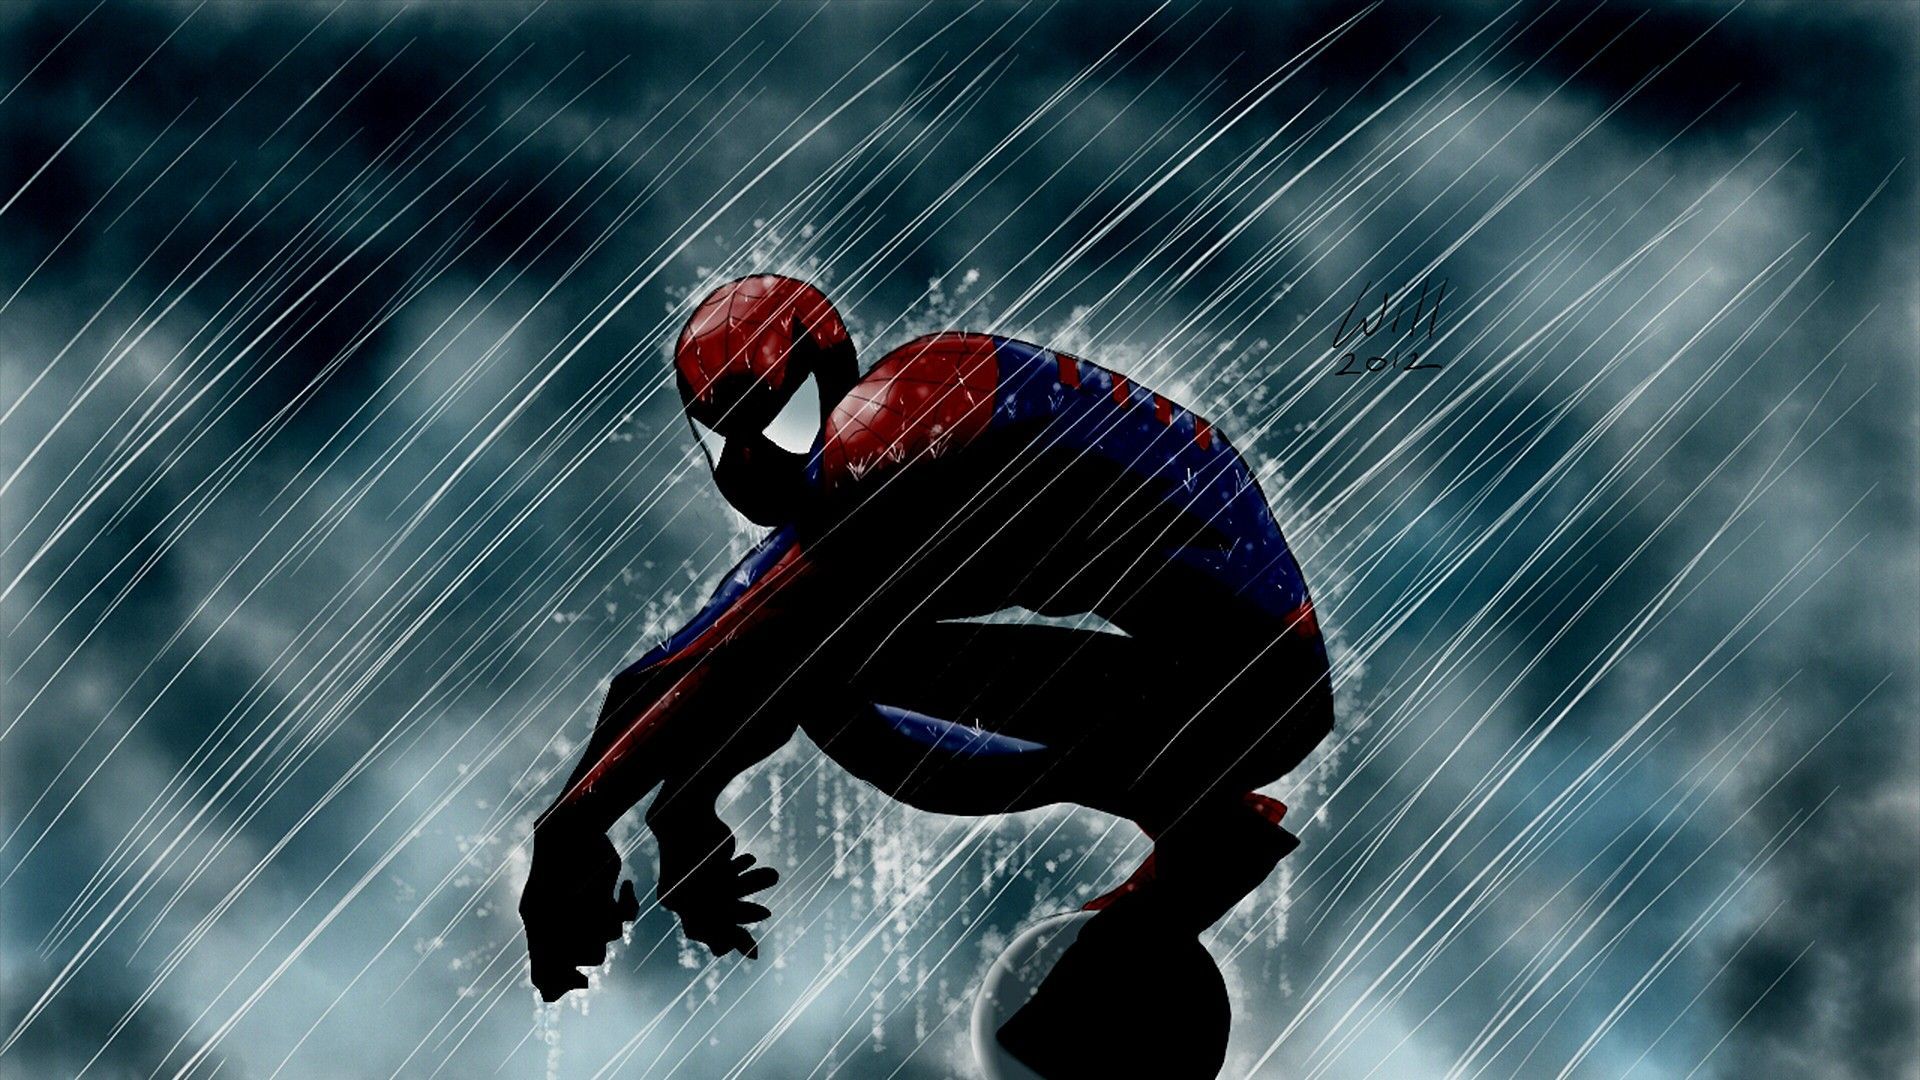 Spiderman in Comic Exclusive HD Wallpapers